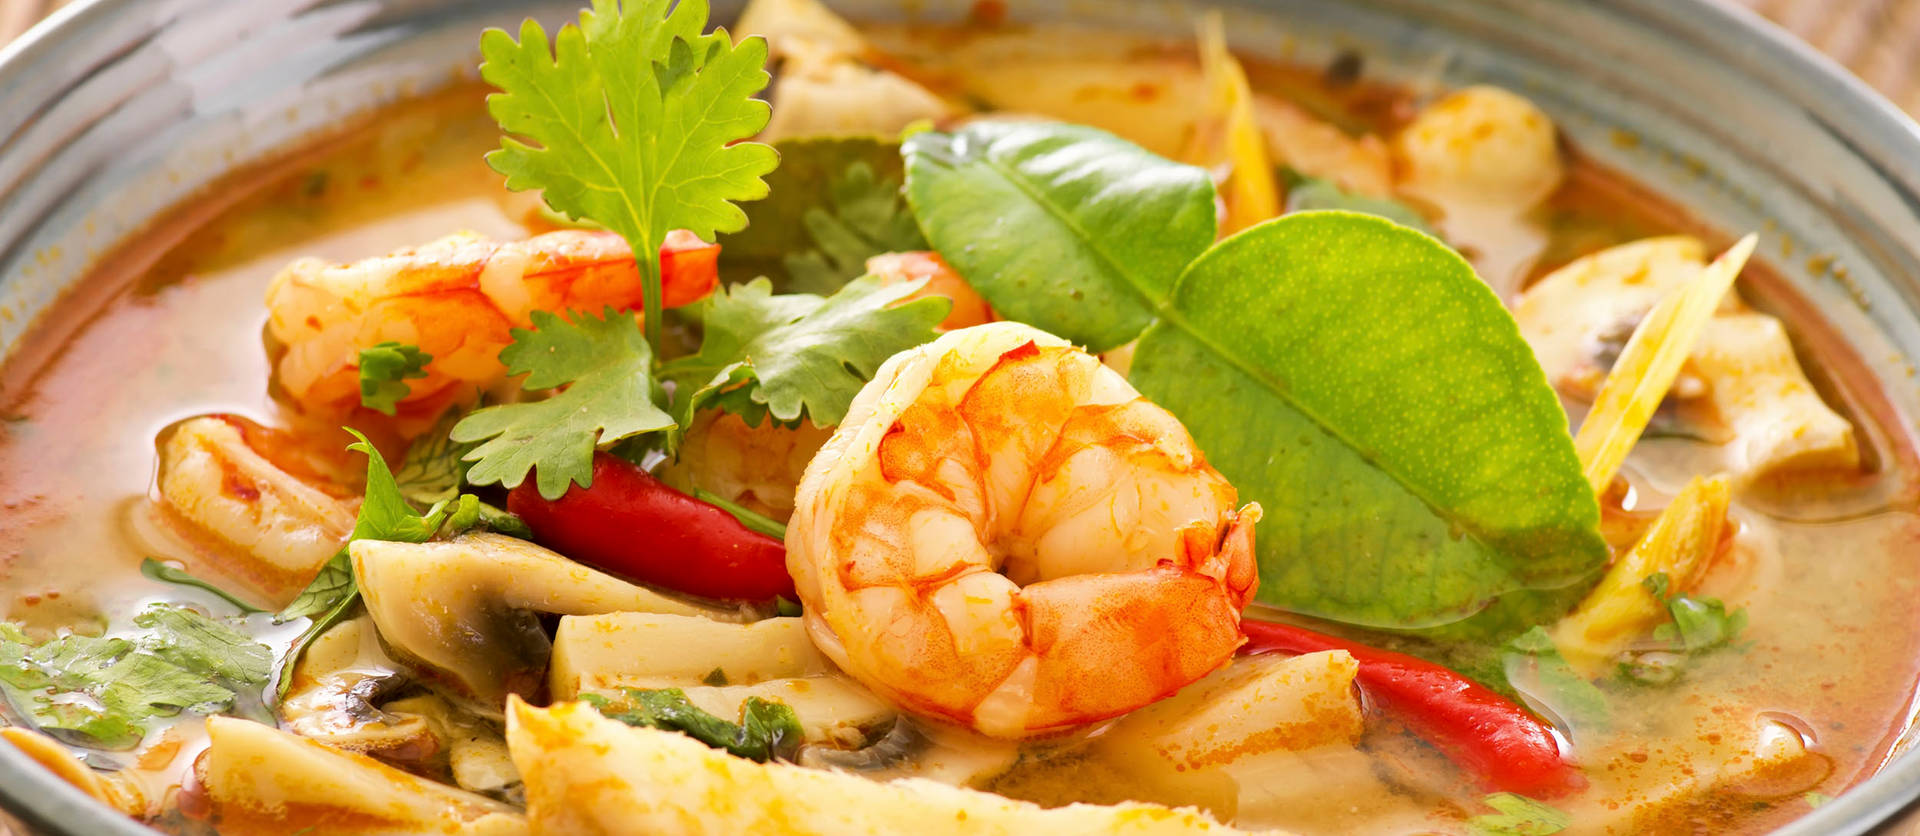 Authentic Seafood Tom Yum Soup - A delicacy of Thai cuisine Wallpaper